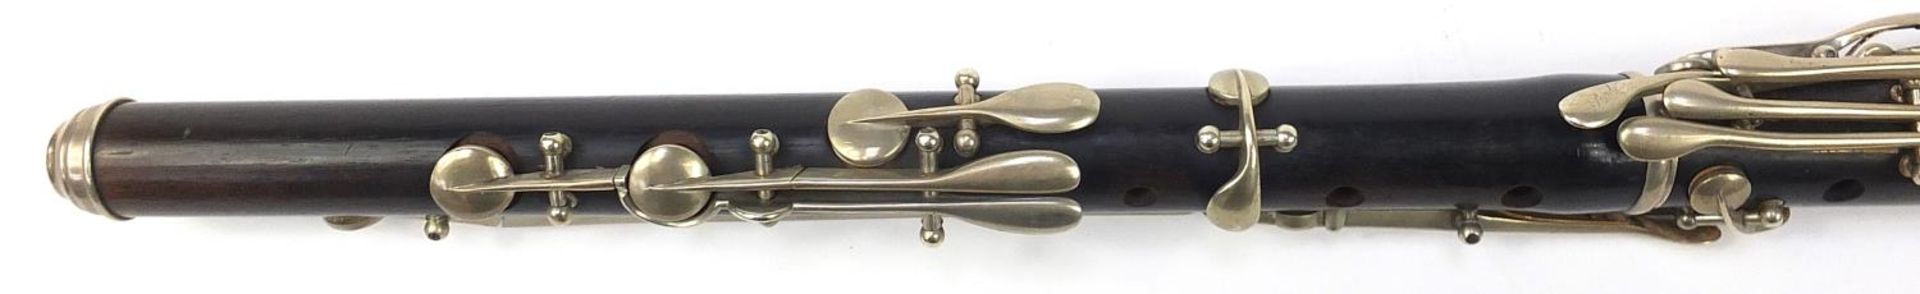 Jul Ludemann rosewood three piece flute with silver plated mounts and case - Image 4 of 9